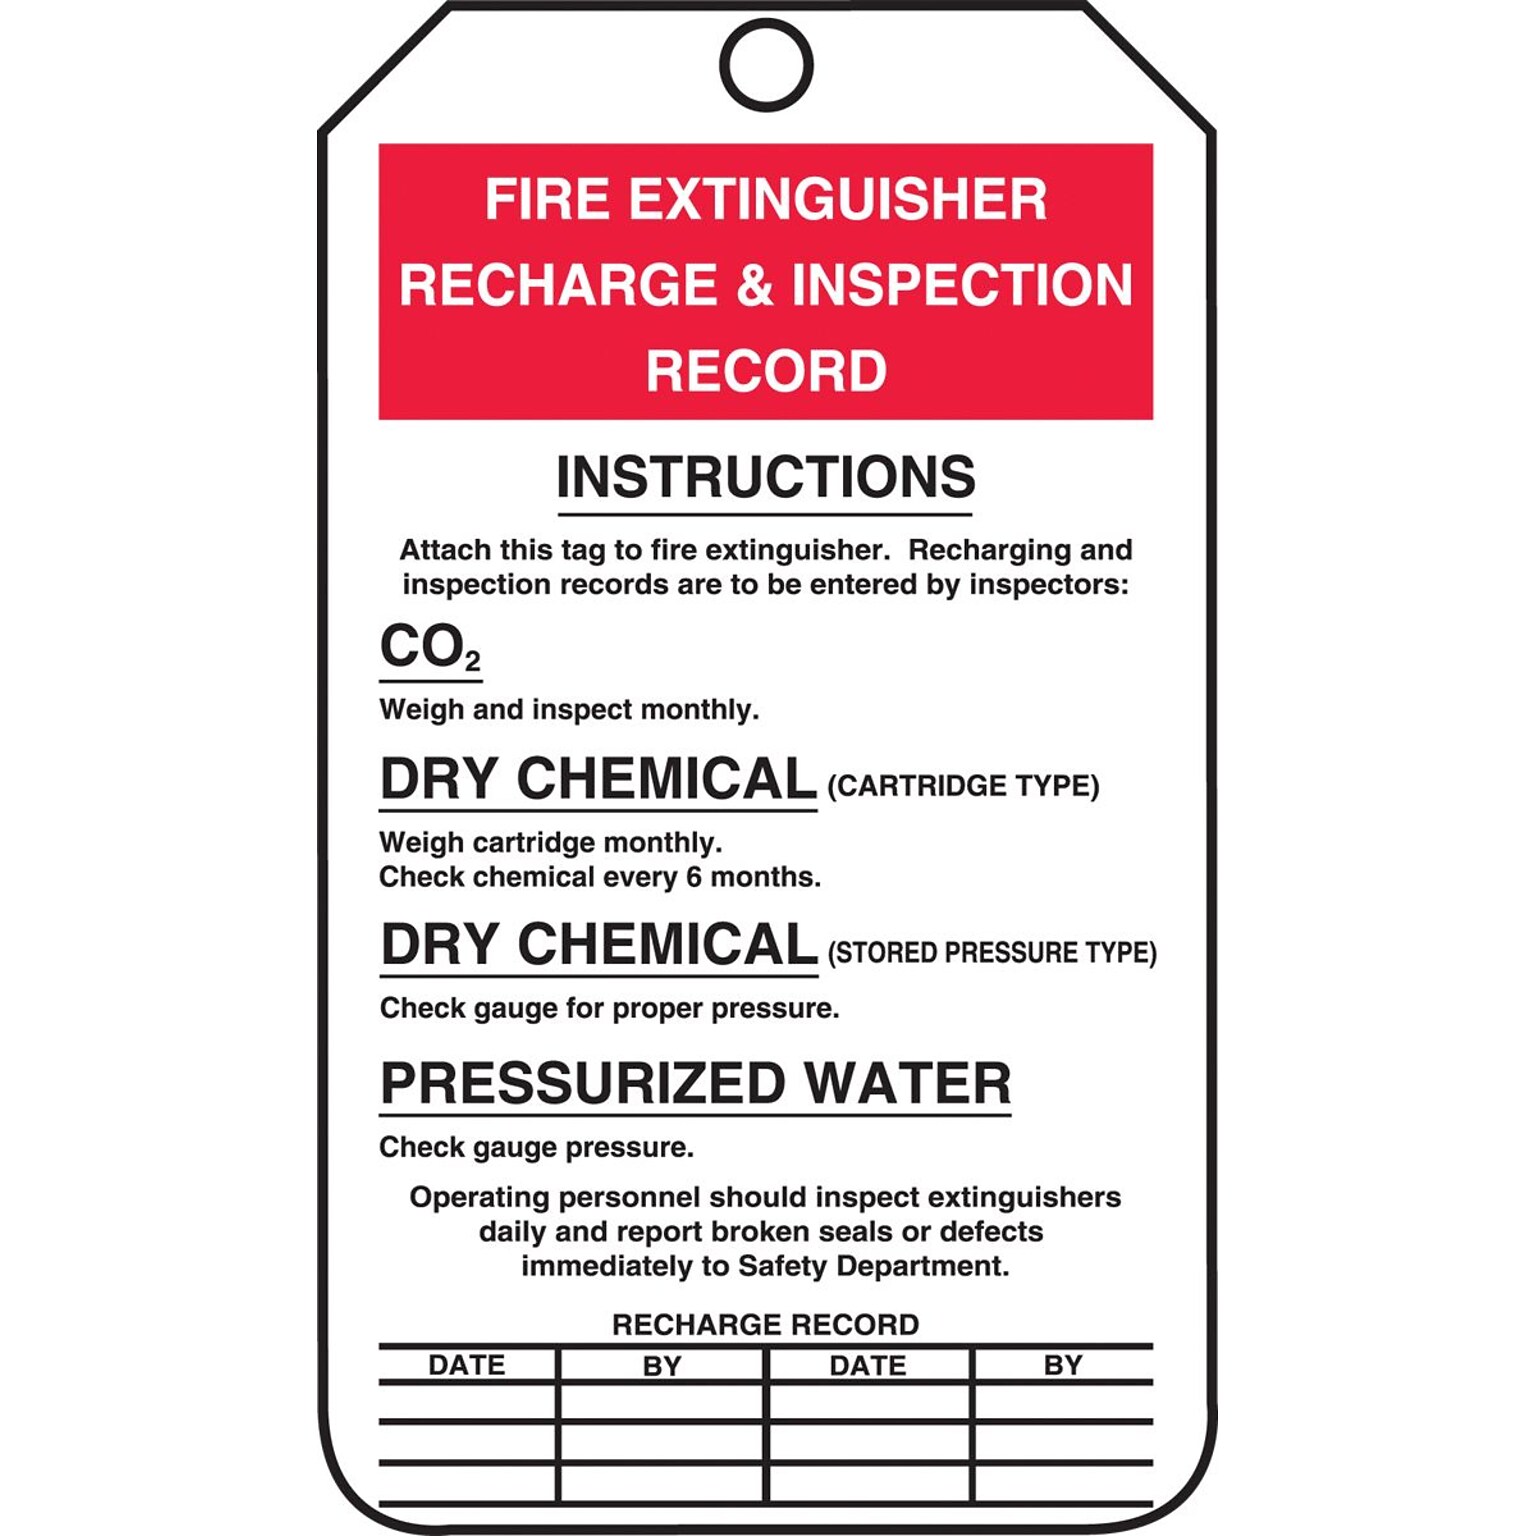 Accuform 5 3/4 x 3 1/4 PF-Cardstock Fire Inspection Tag FIRE.., Red/Black On White, 25/Pack (MGT208CTP)